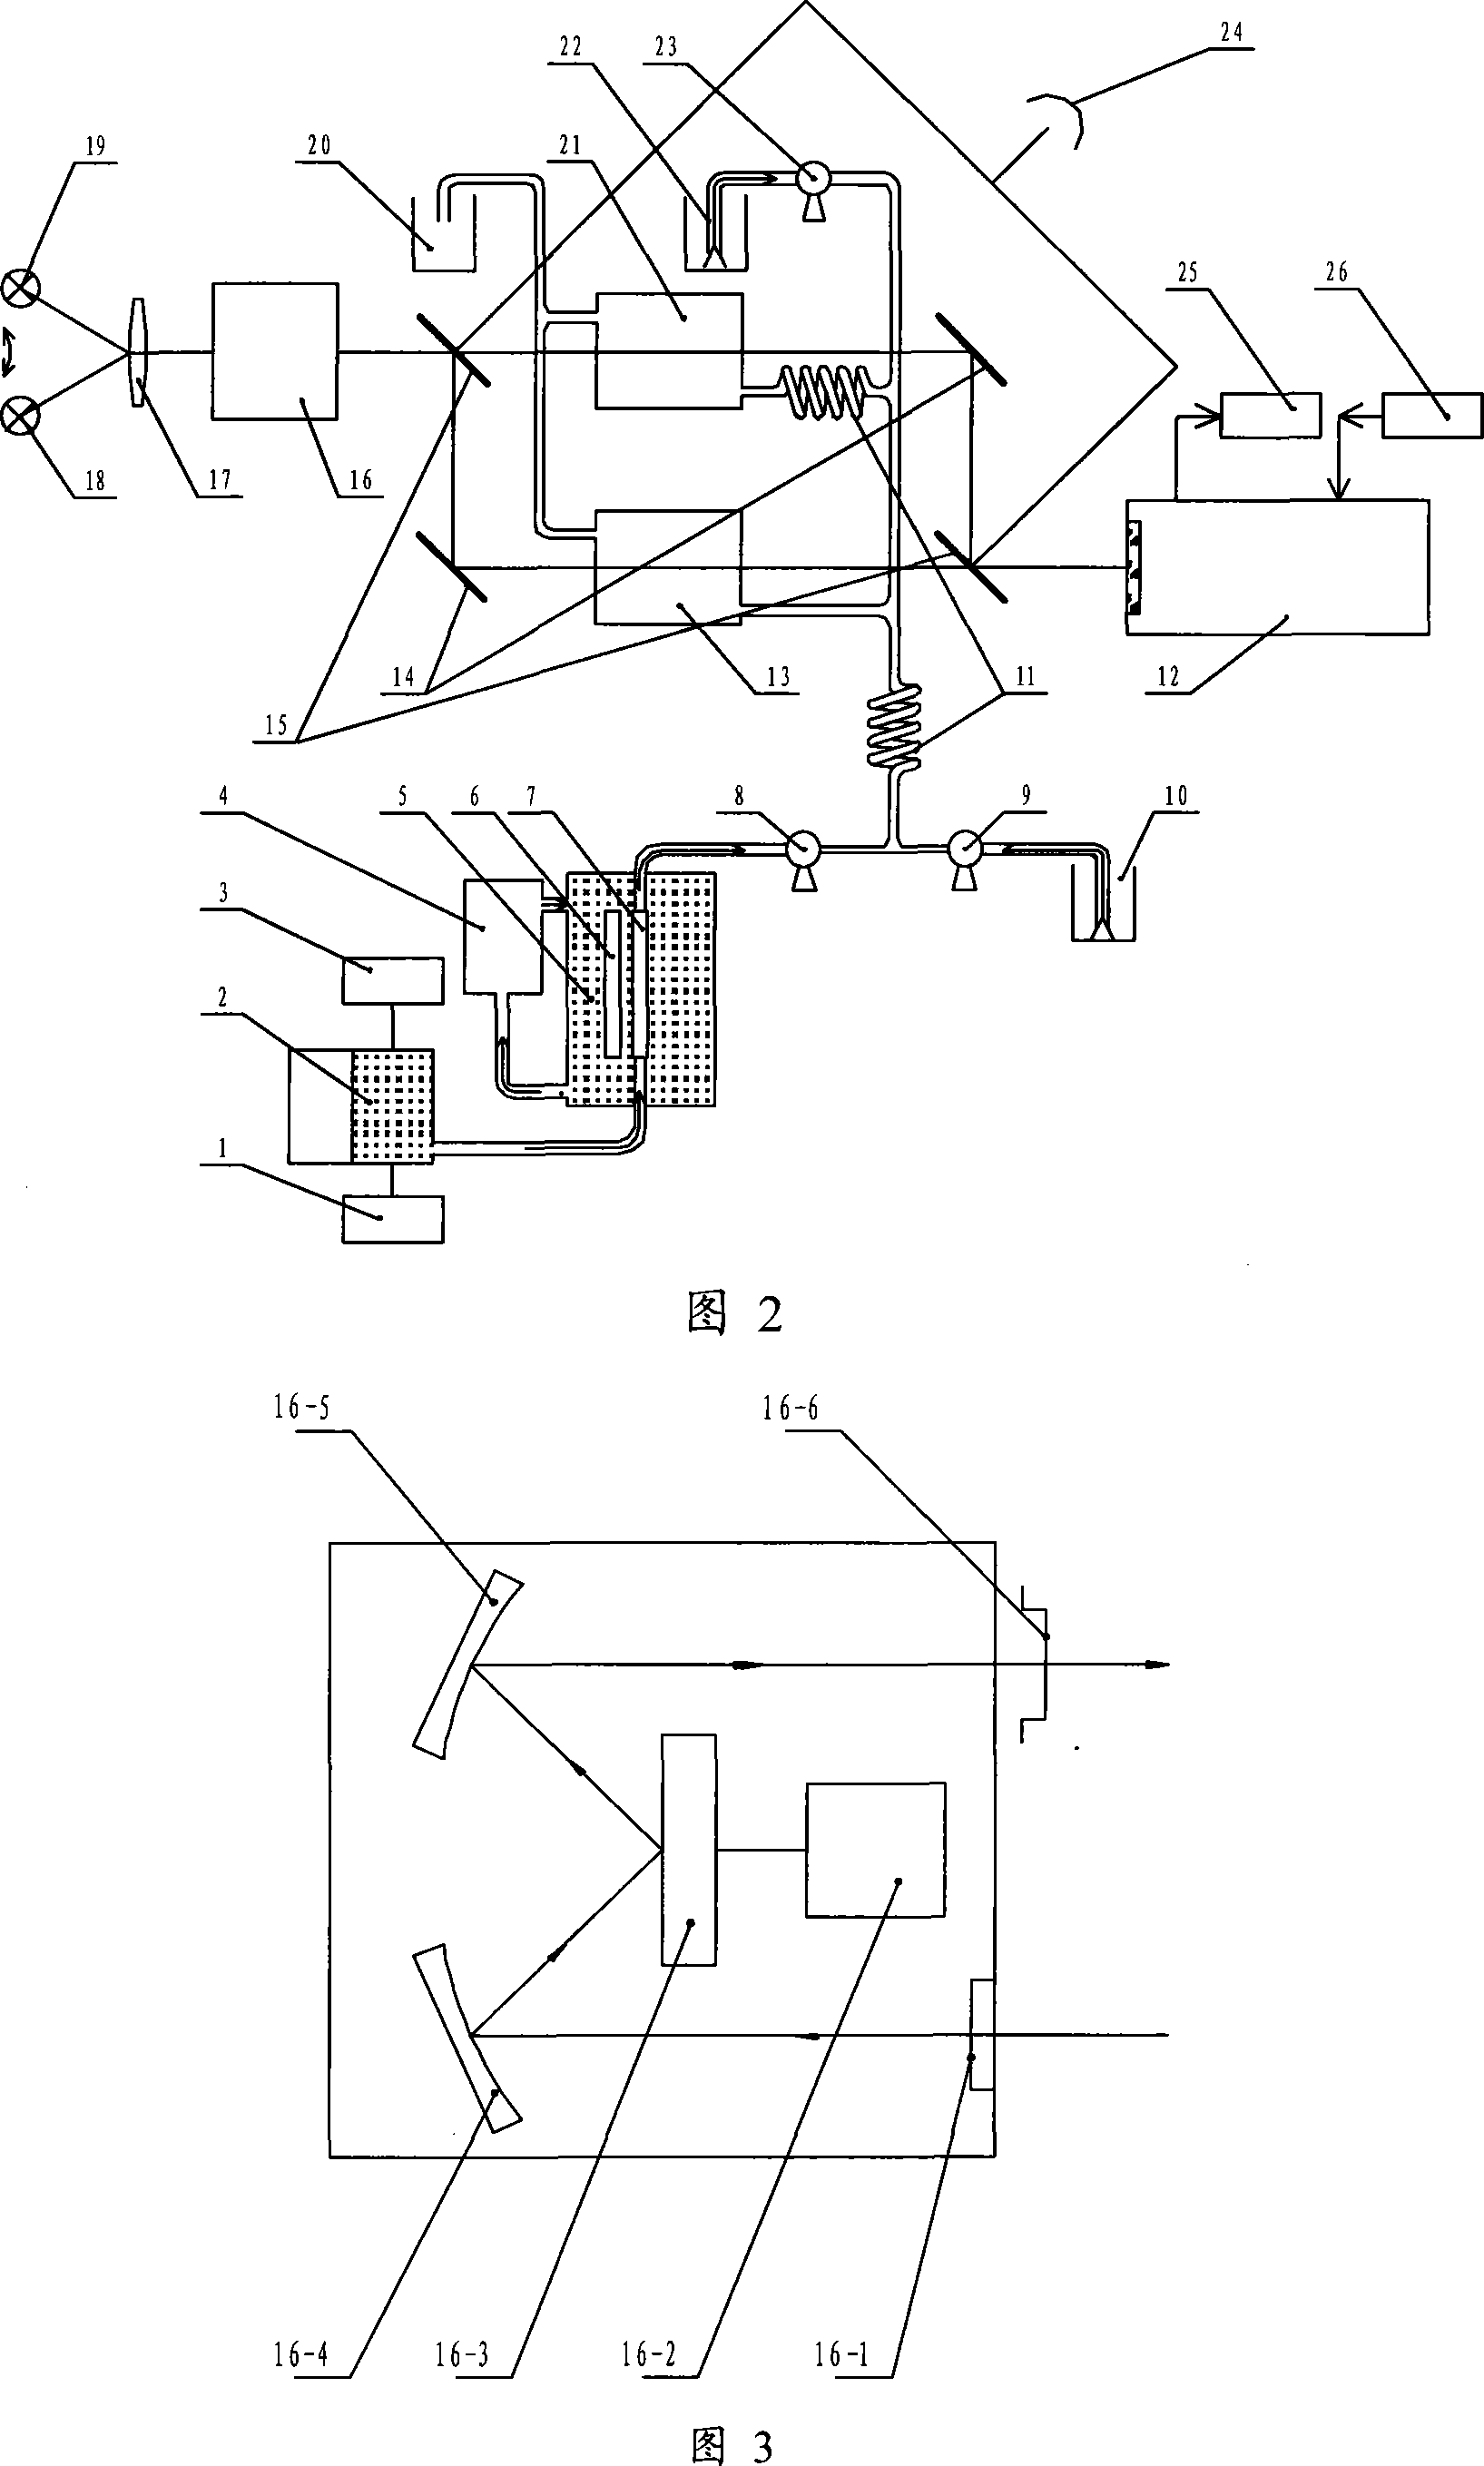 Method for measuring water body total nitrogen and total phosphorous by digestion spectrophotometry of ultraviolet cooperating with ozone